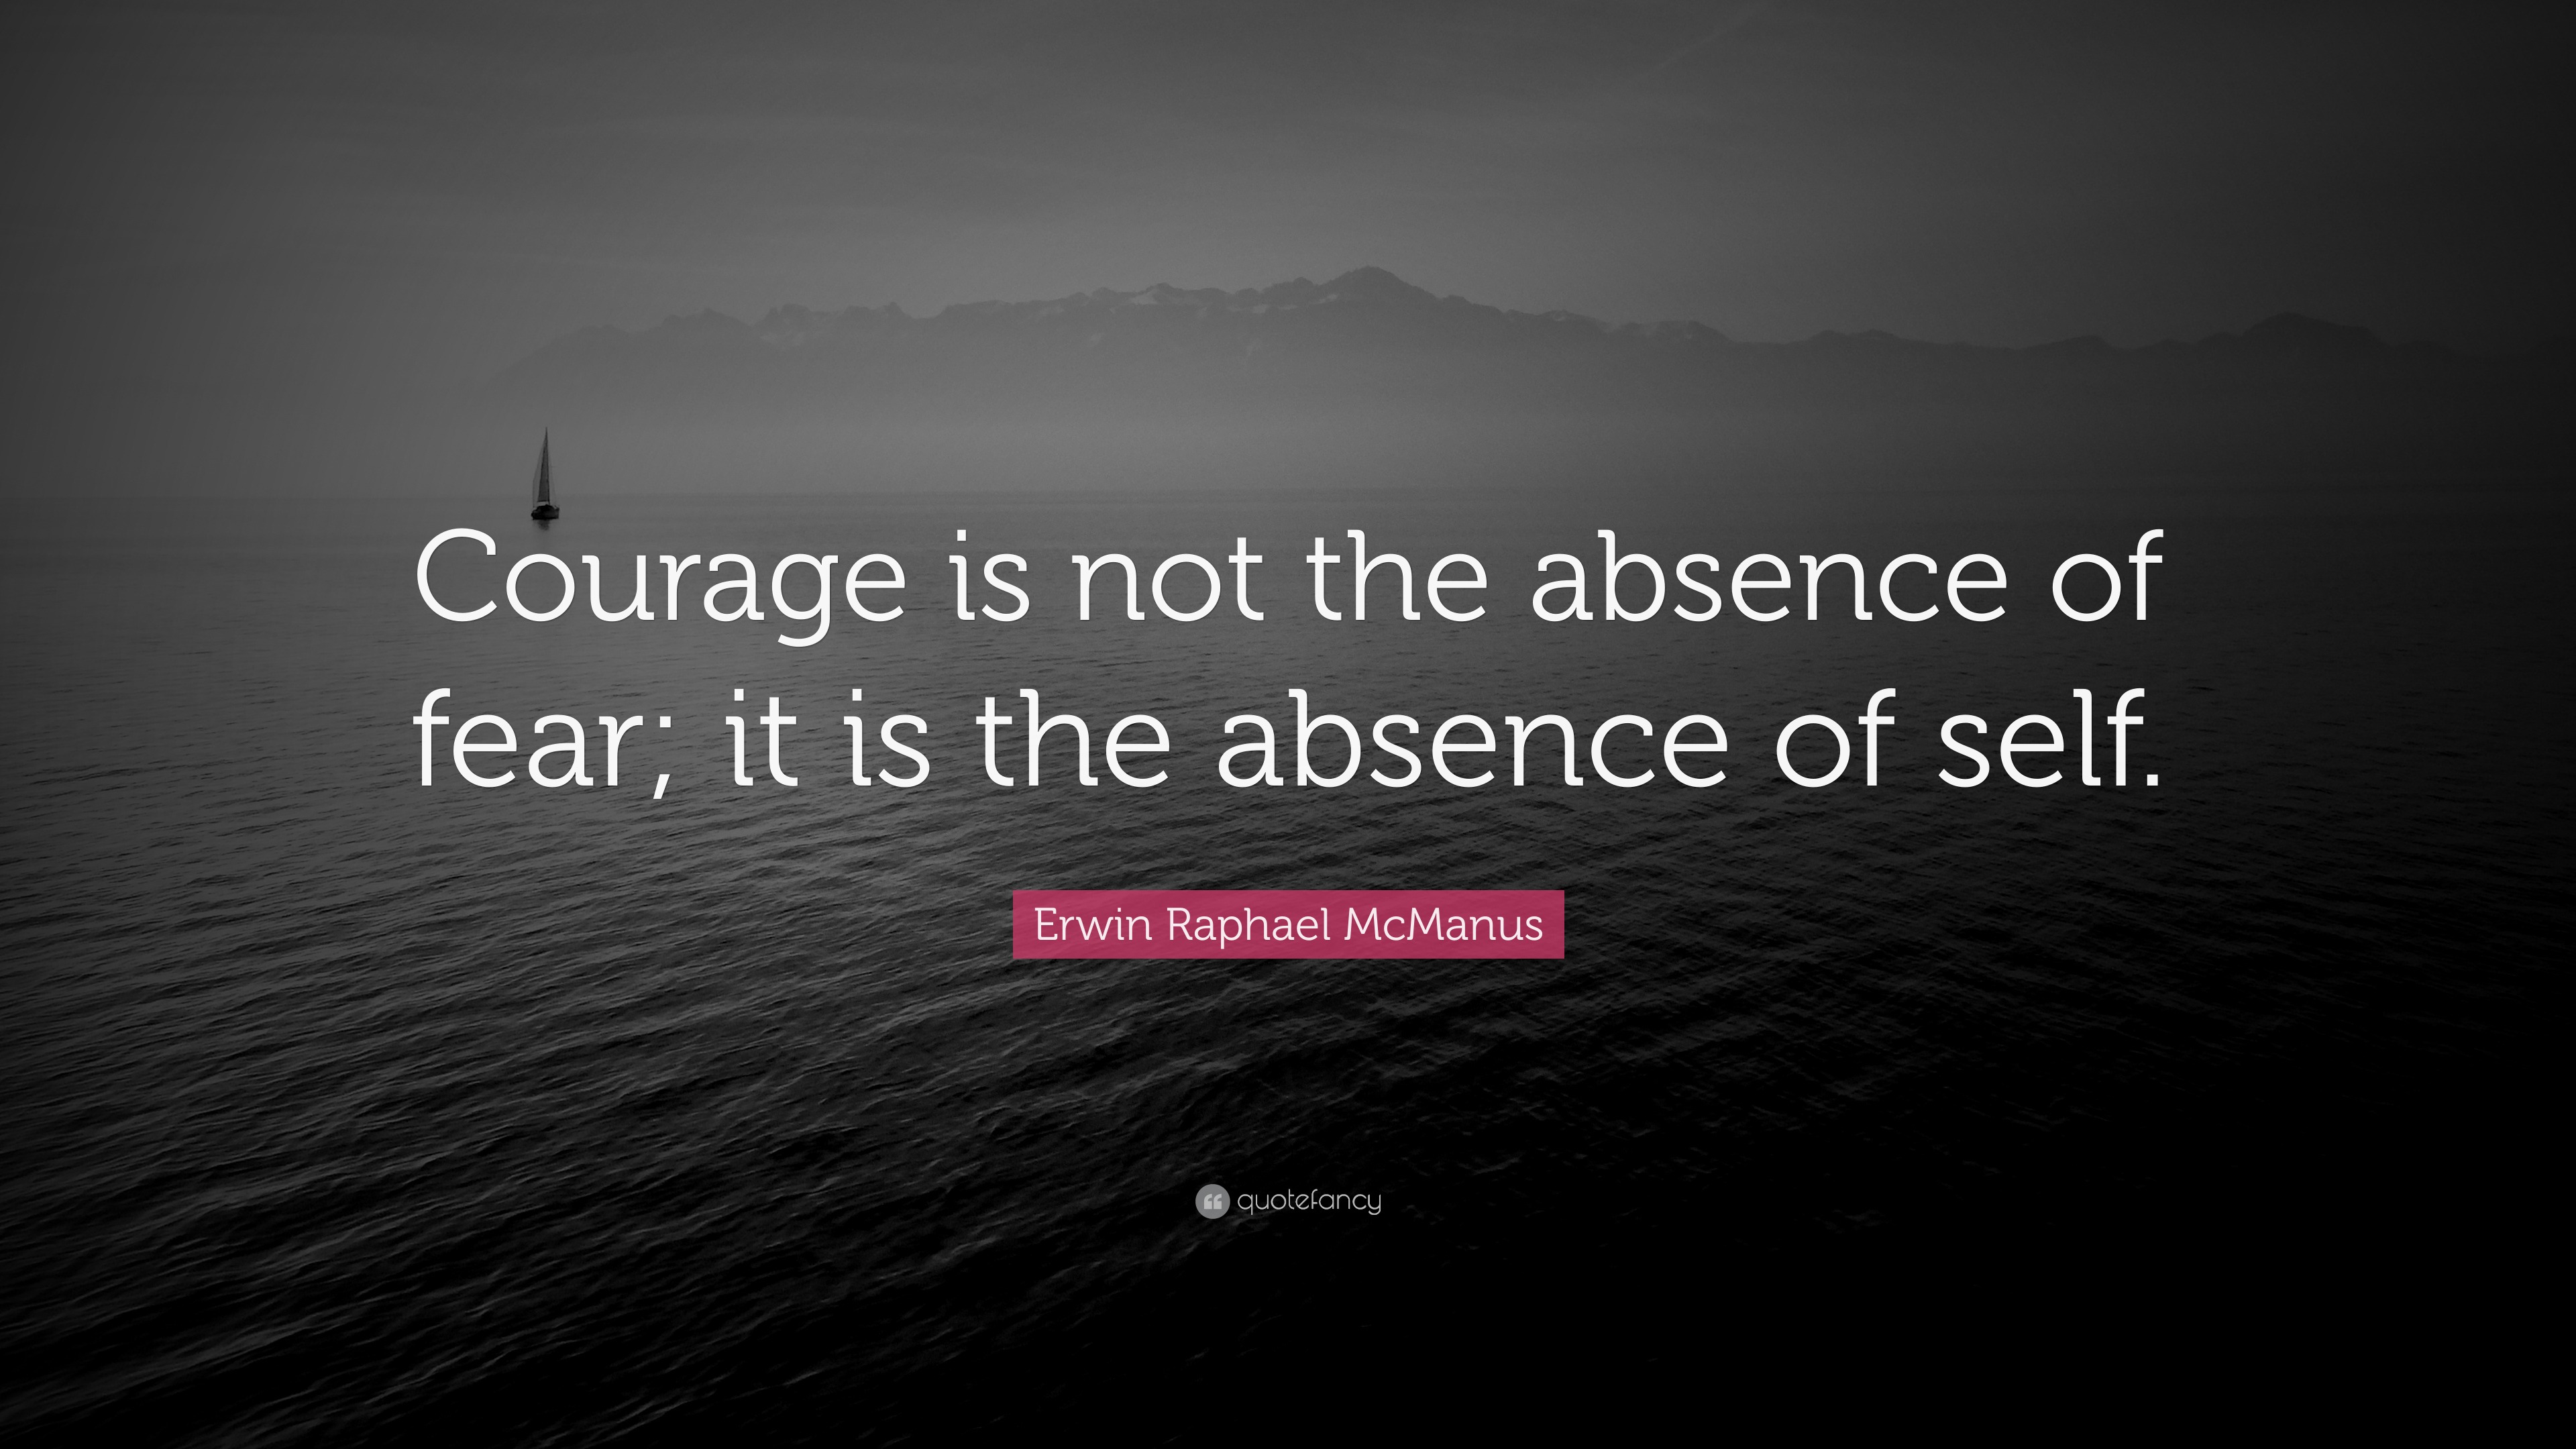 Erwin Raphael McManus Quote: “Courage is not the absence of fear; it is ...